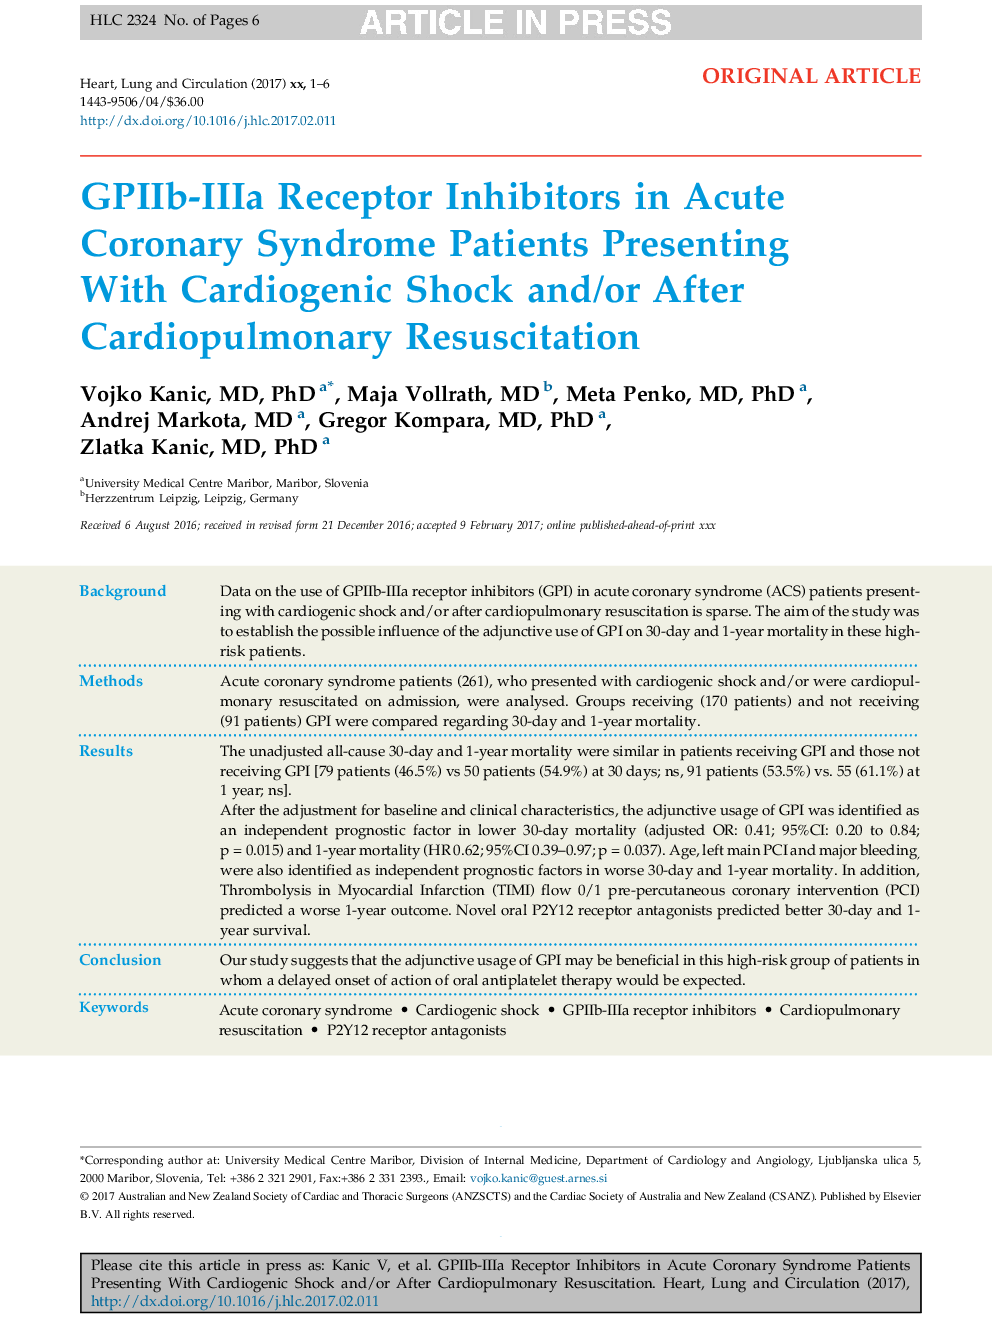 GPIIb-IIIa Receptor Inhibitors in Acute Coronary Syndrome Patients Presenting With Cardiogenic Shock and/or After Cardiopulmonary Resuscitation